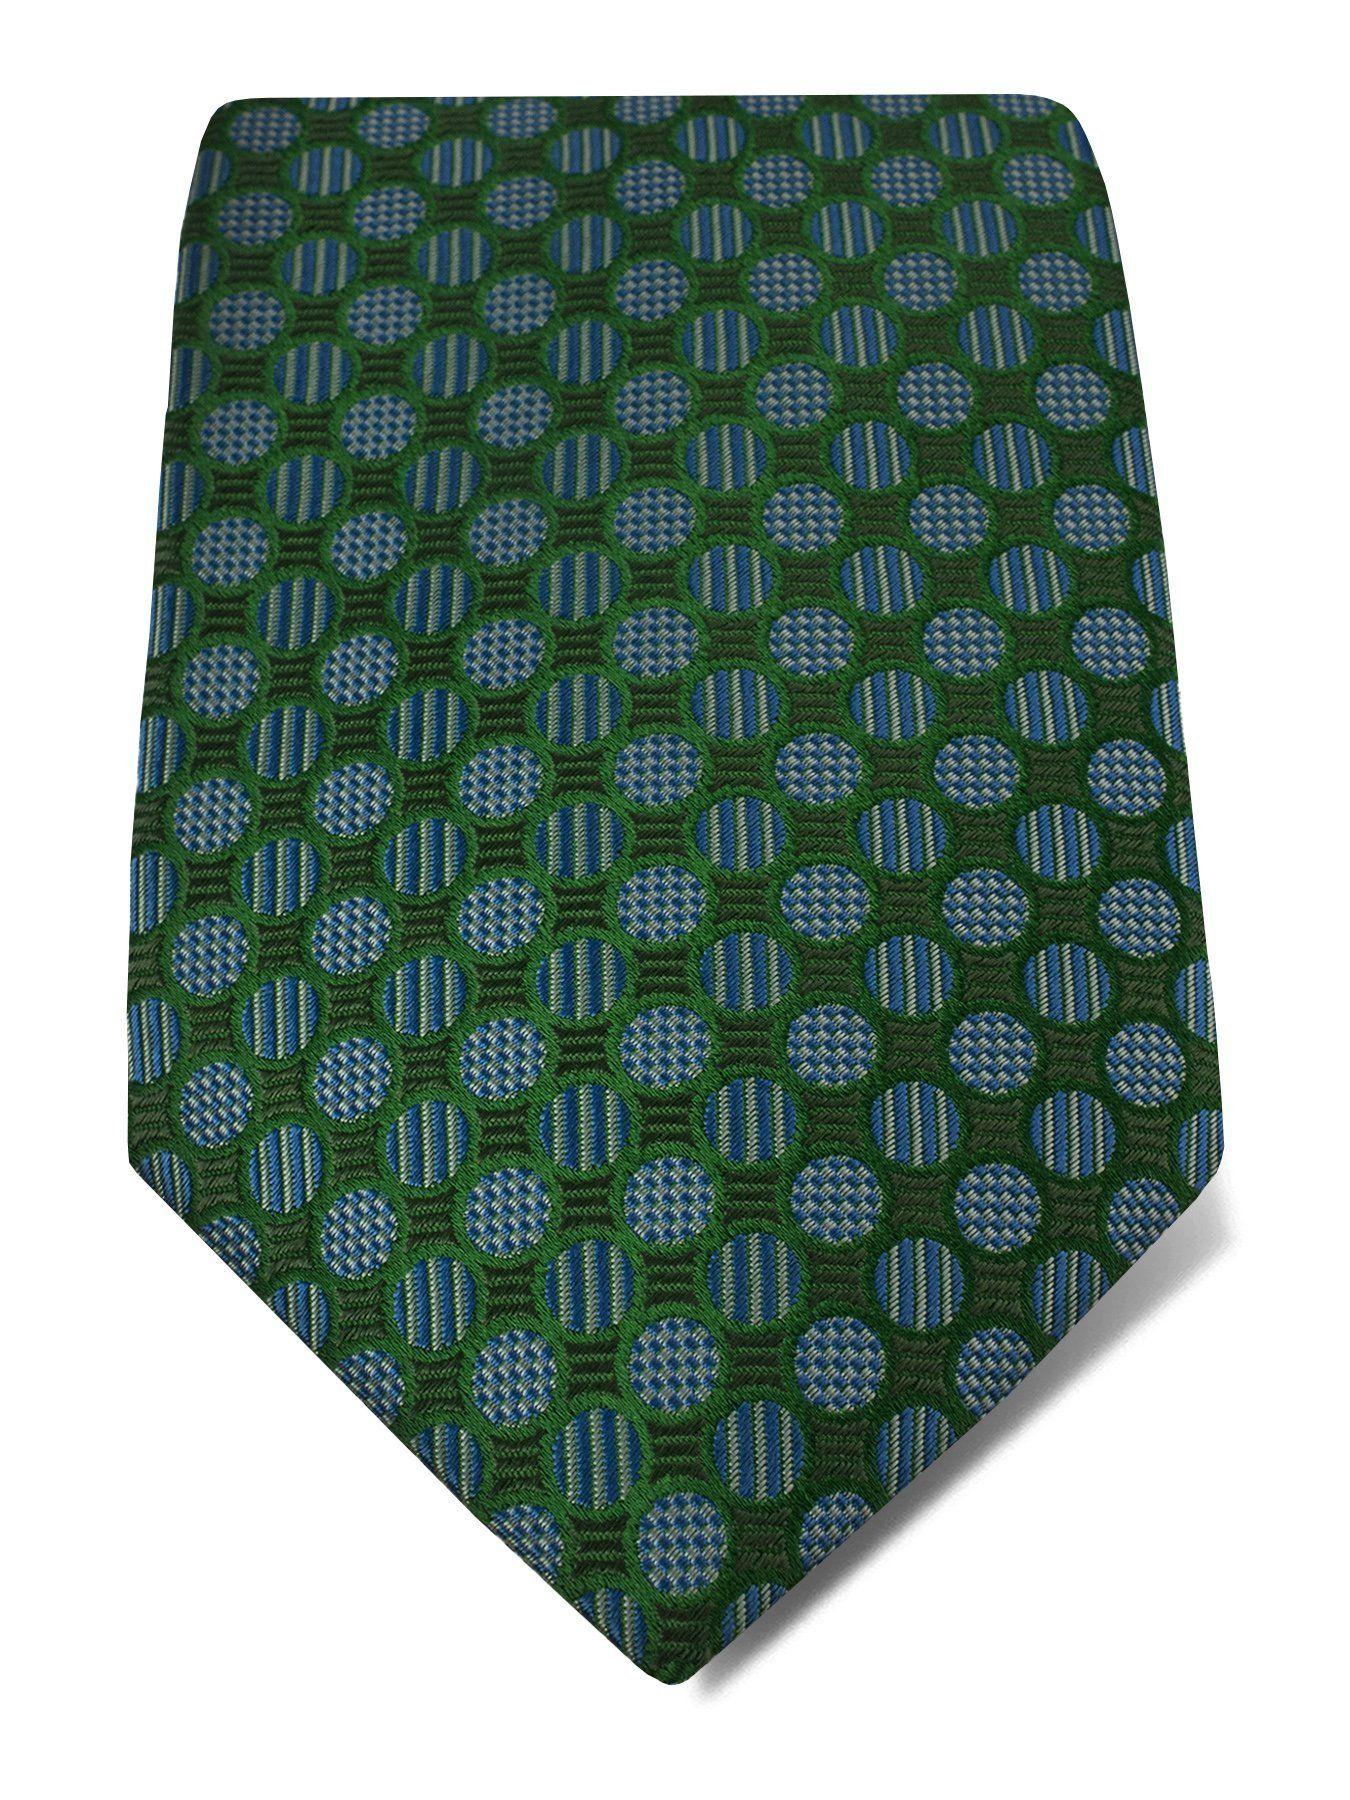 Green Rectangle With White Circles Logo - Green Woven Silk Tie with Blue & White Circles & Key